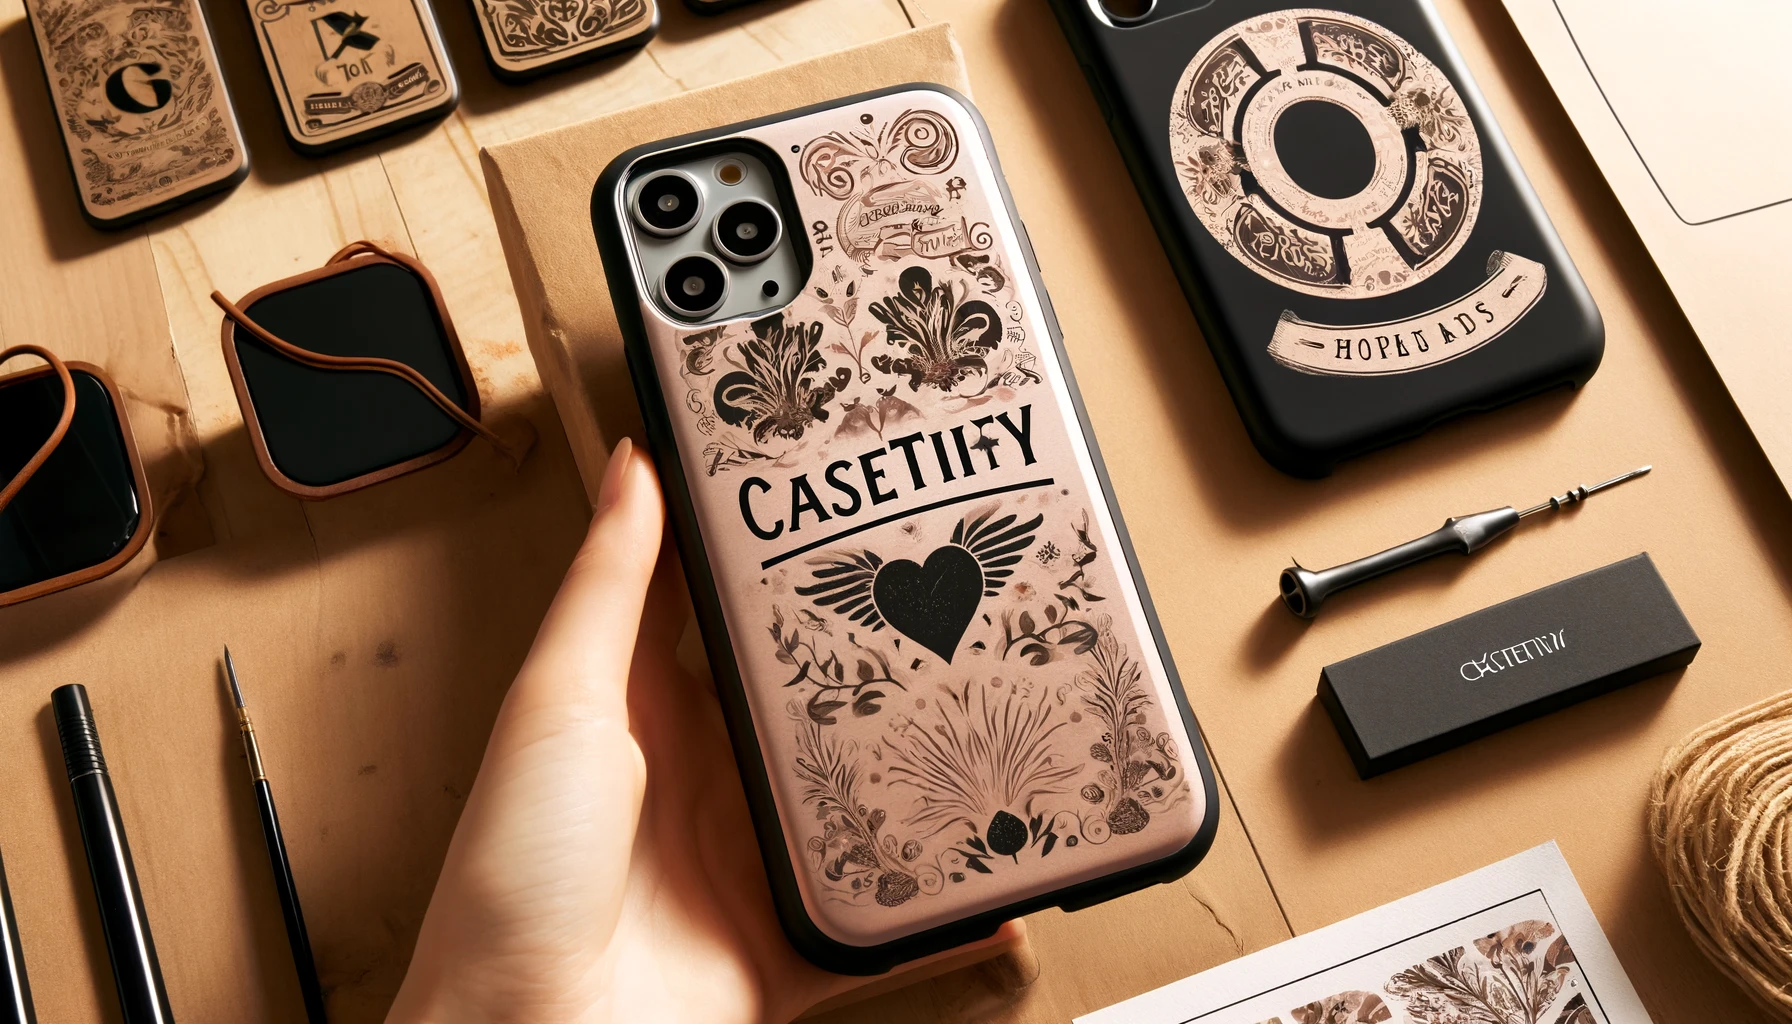 An image showcasing the custom features of CASETiFY phone cases. Highlight personalized designs, monograms, and unique prints with the word 'CASETiFY' prominently displayed.